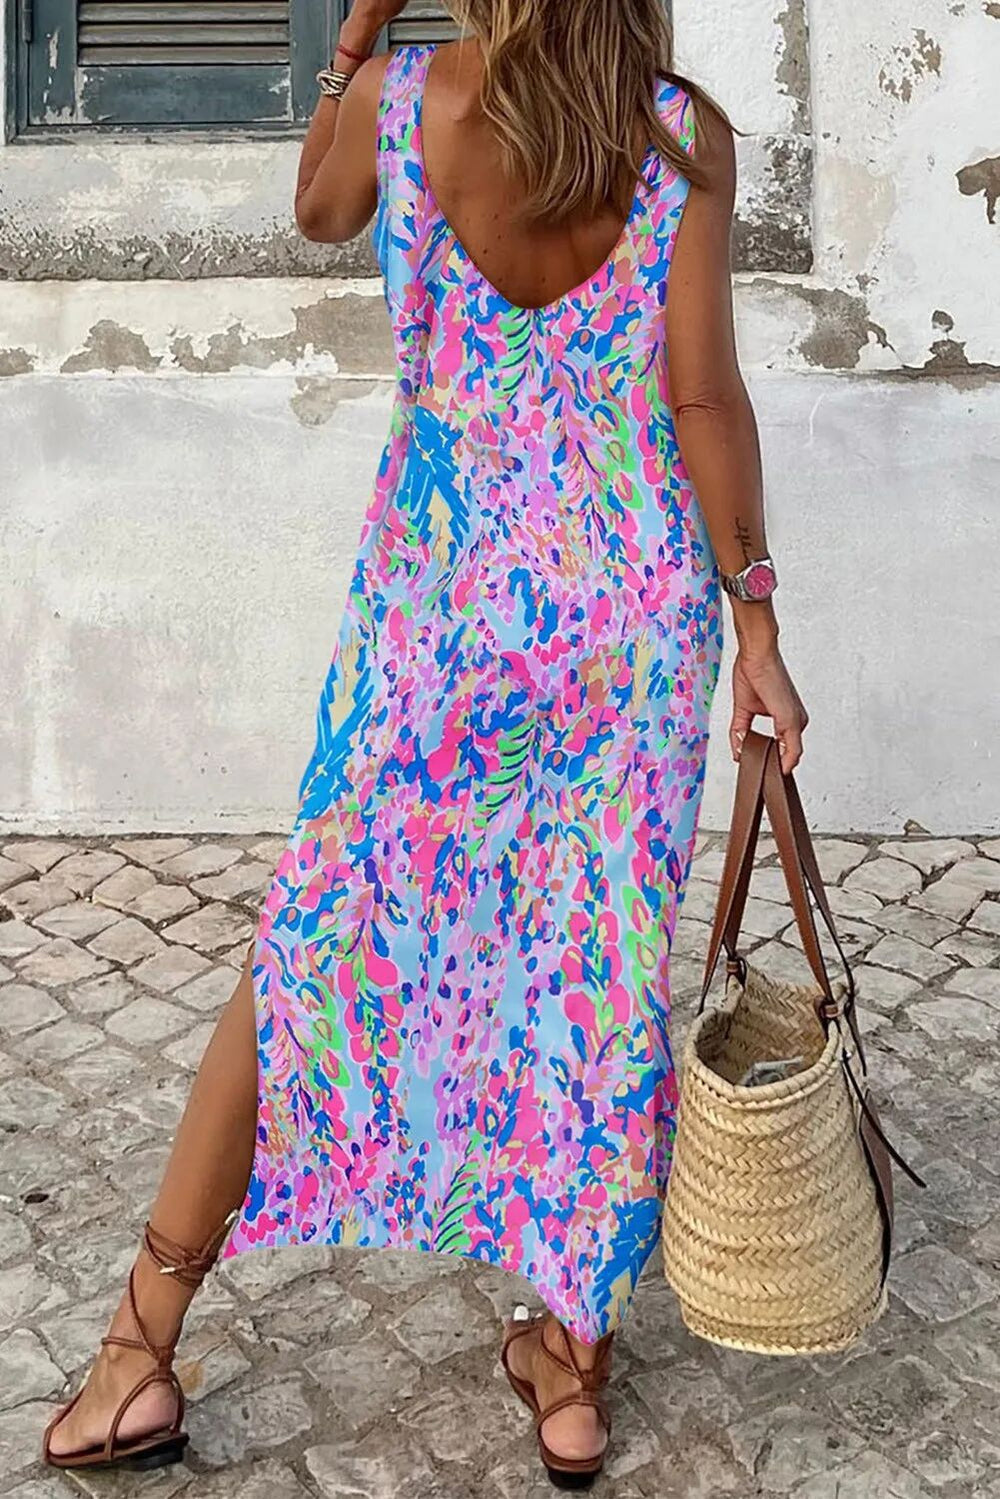 Personalized Floral Print Sleeveless Dress round Neck Pullover Ankle Length Dress - Sizes S-XL Ti Amo I love you